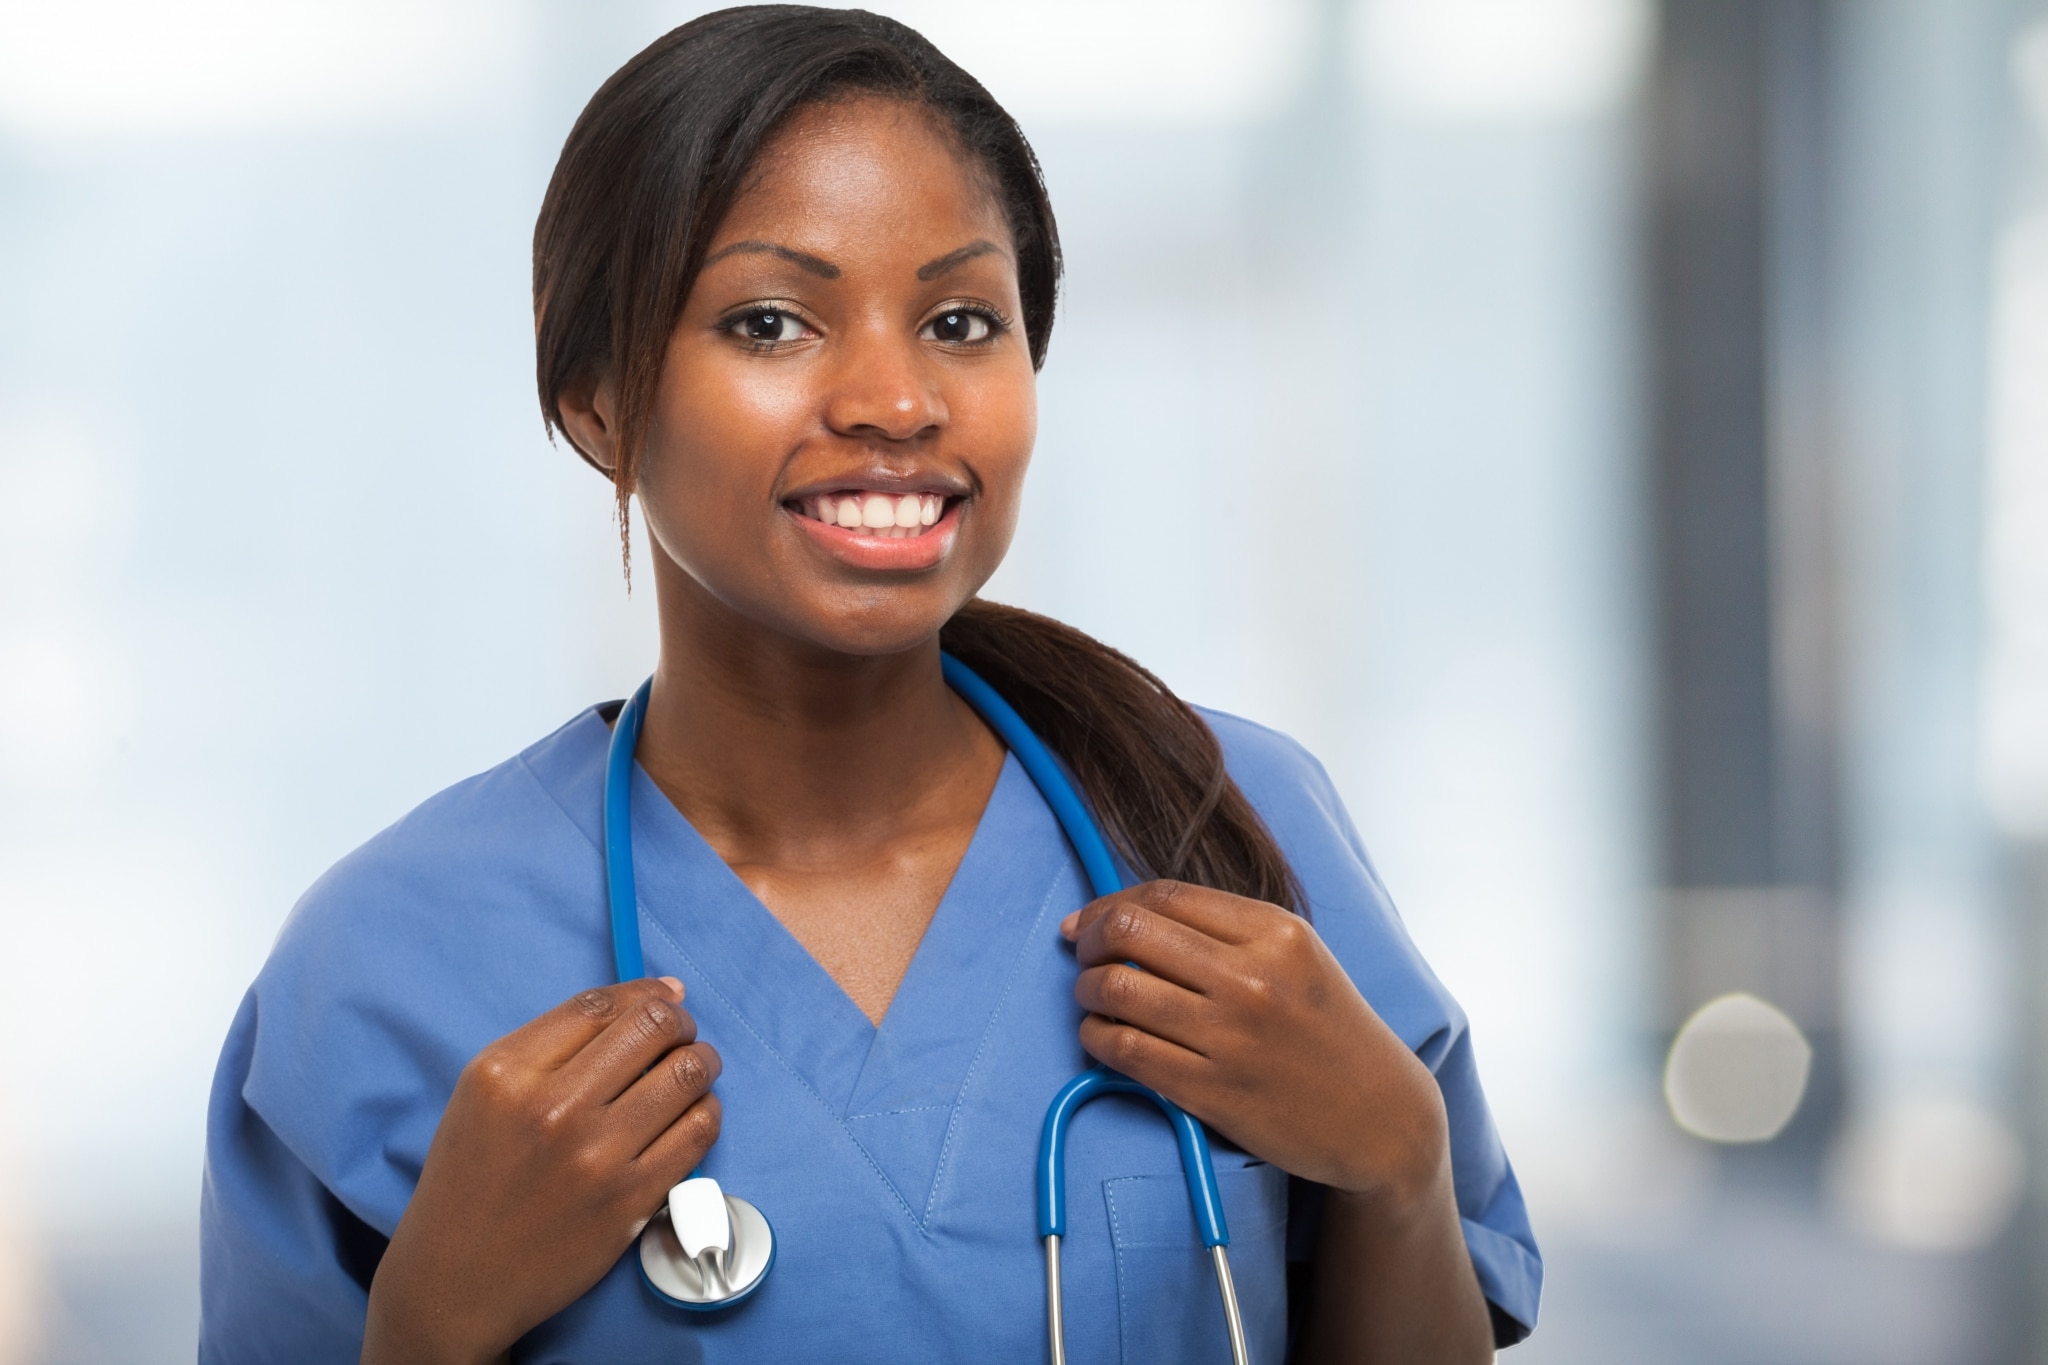 CNA to RN: How to Go from CNA to Registered Nurse | Provo College